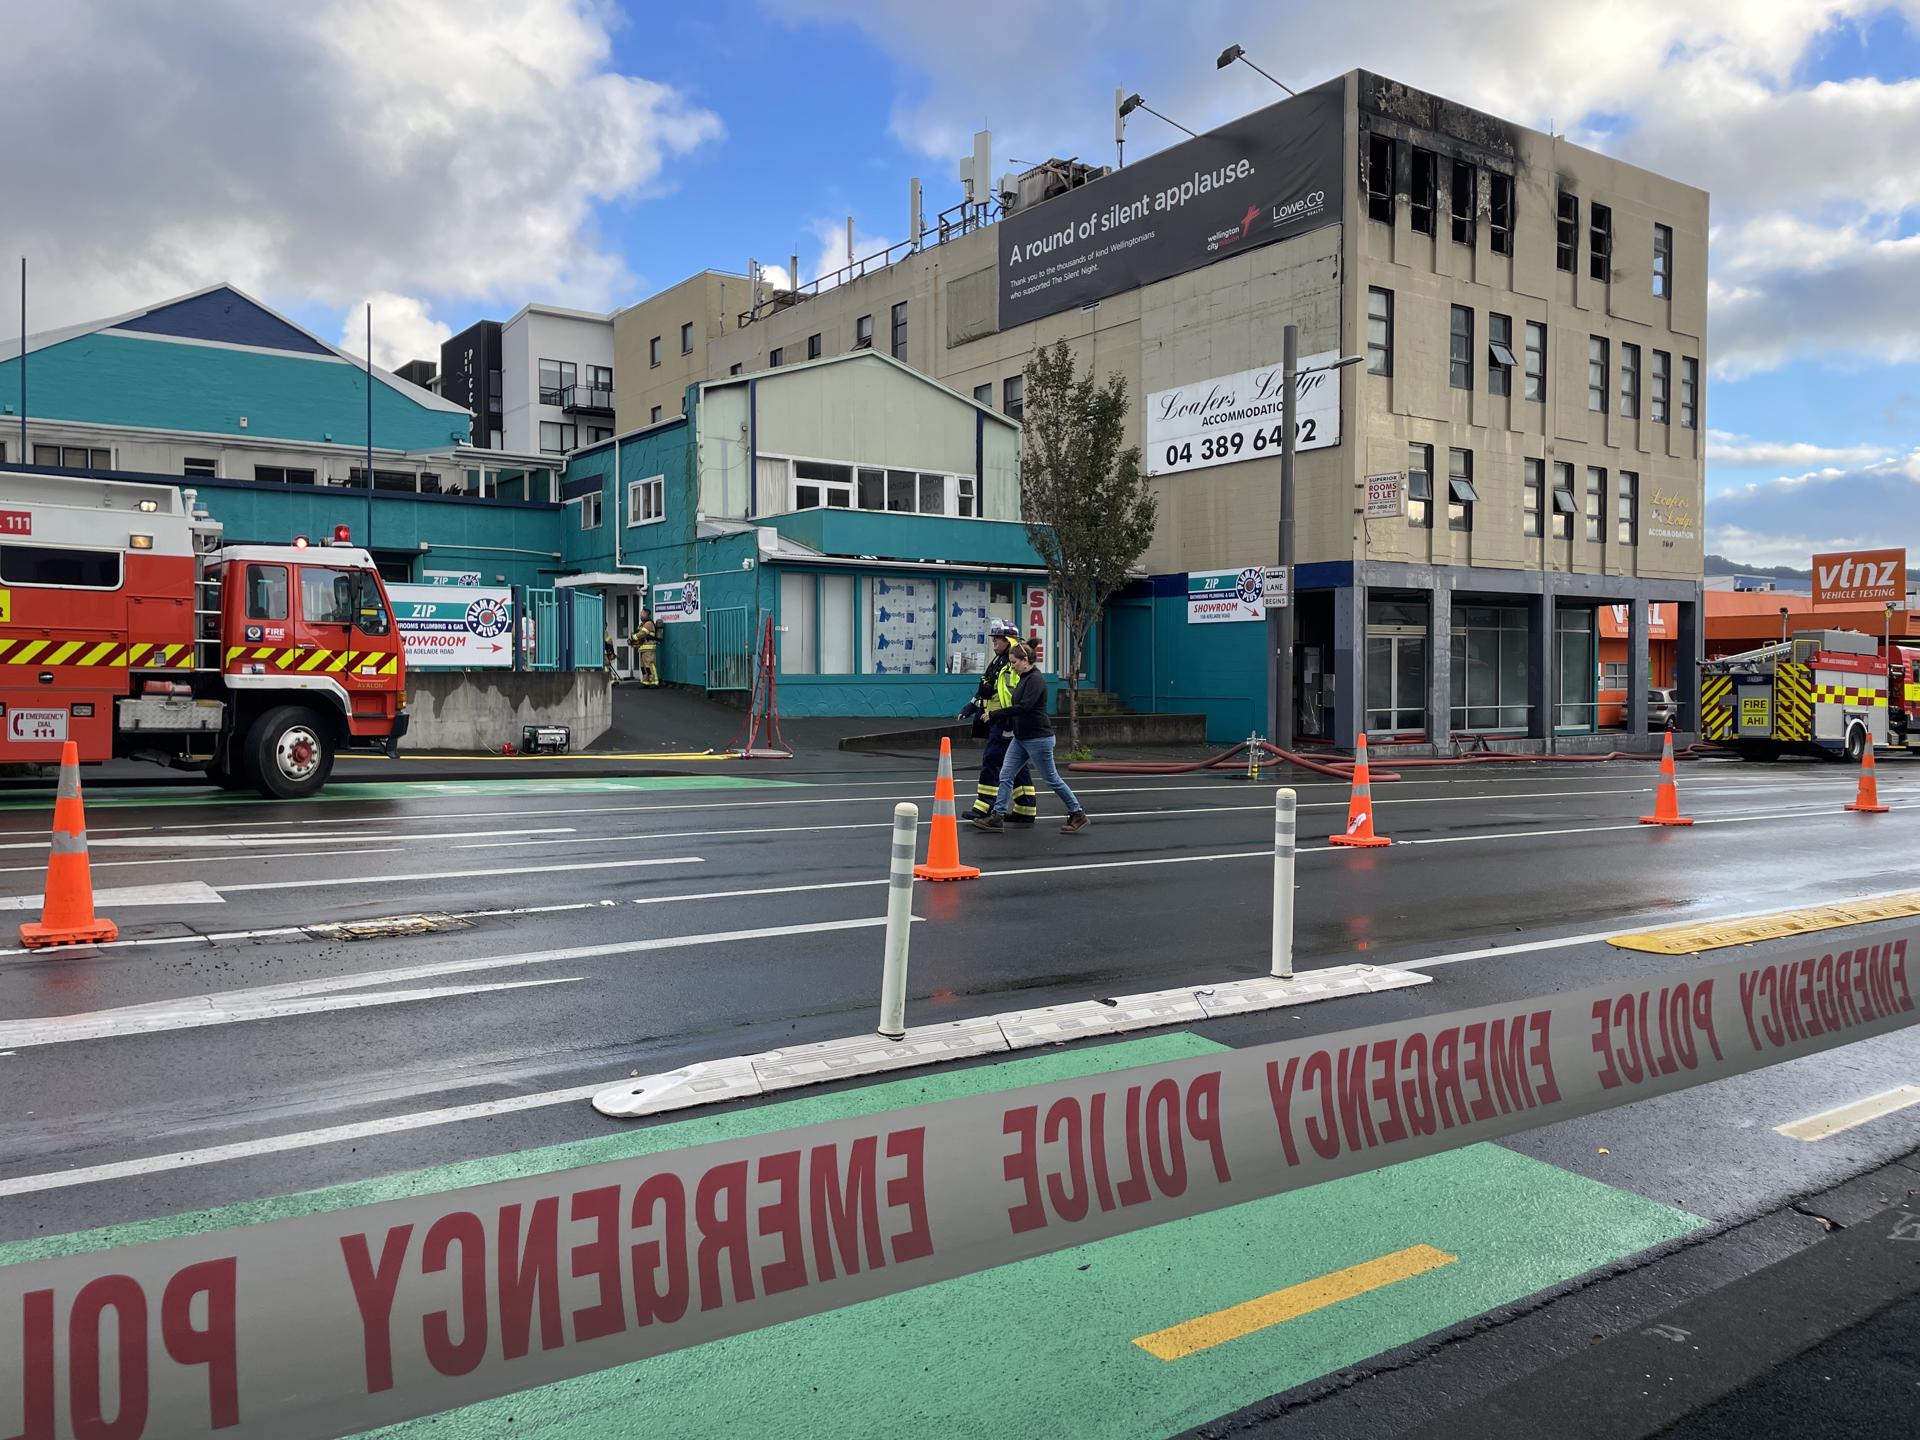 A hostel shows signs of damage after a fire ripped through the building, resulting in multiple fatalities, in Wellington, New Zealand, 16 May 2023. EFE/EPA/BEN MCKAY AUSTRALIA AND NEW ZEALAND OUT